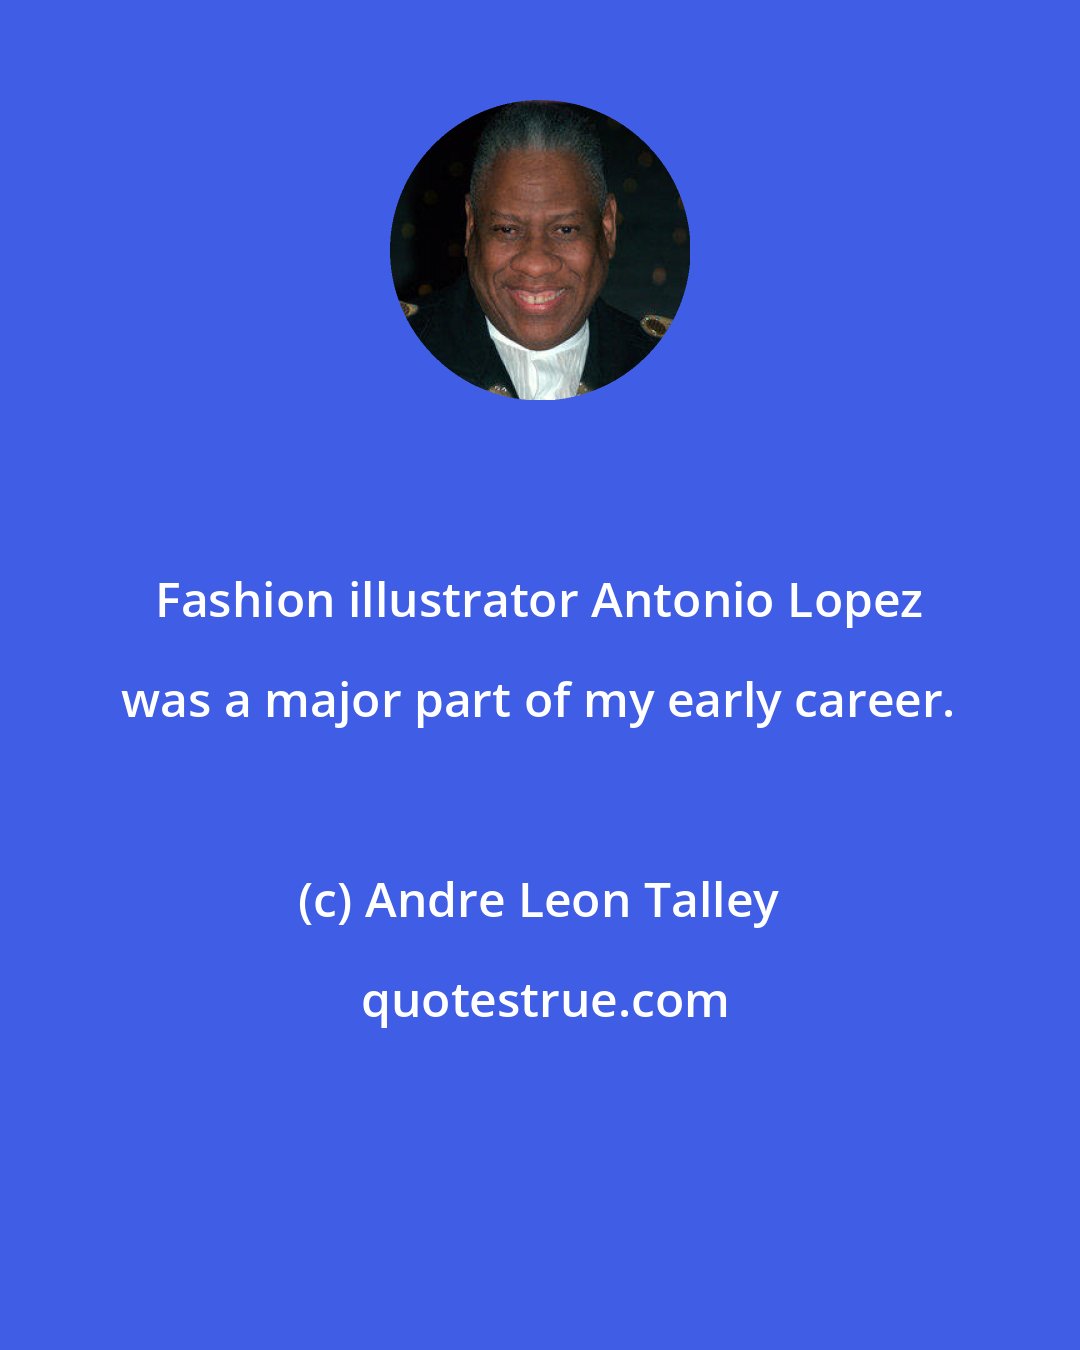 Andre Leon Talley: Fashion illustrator Antonio Lopez was a major part of my early career.